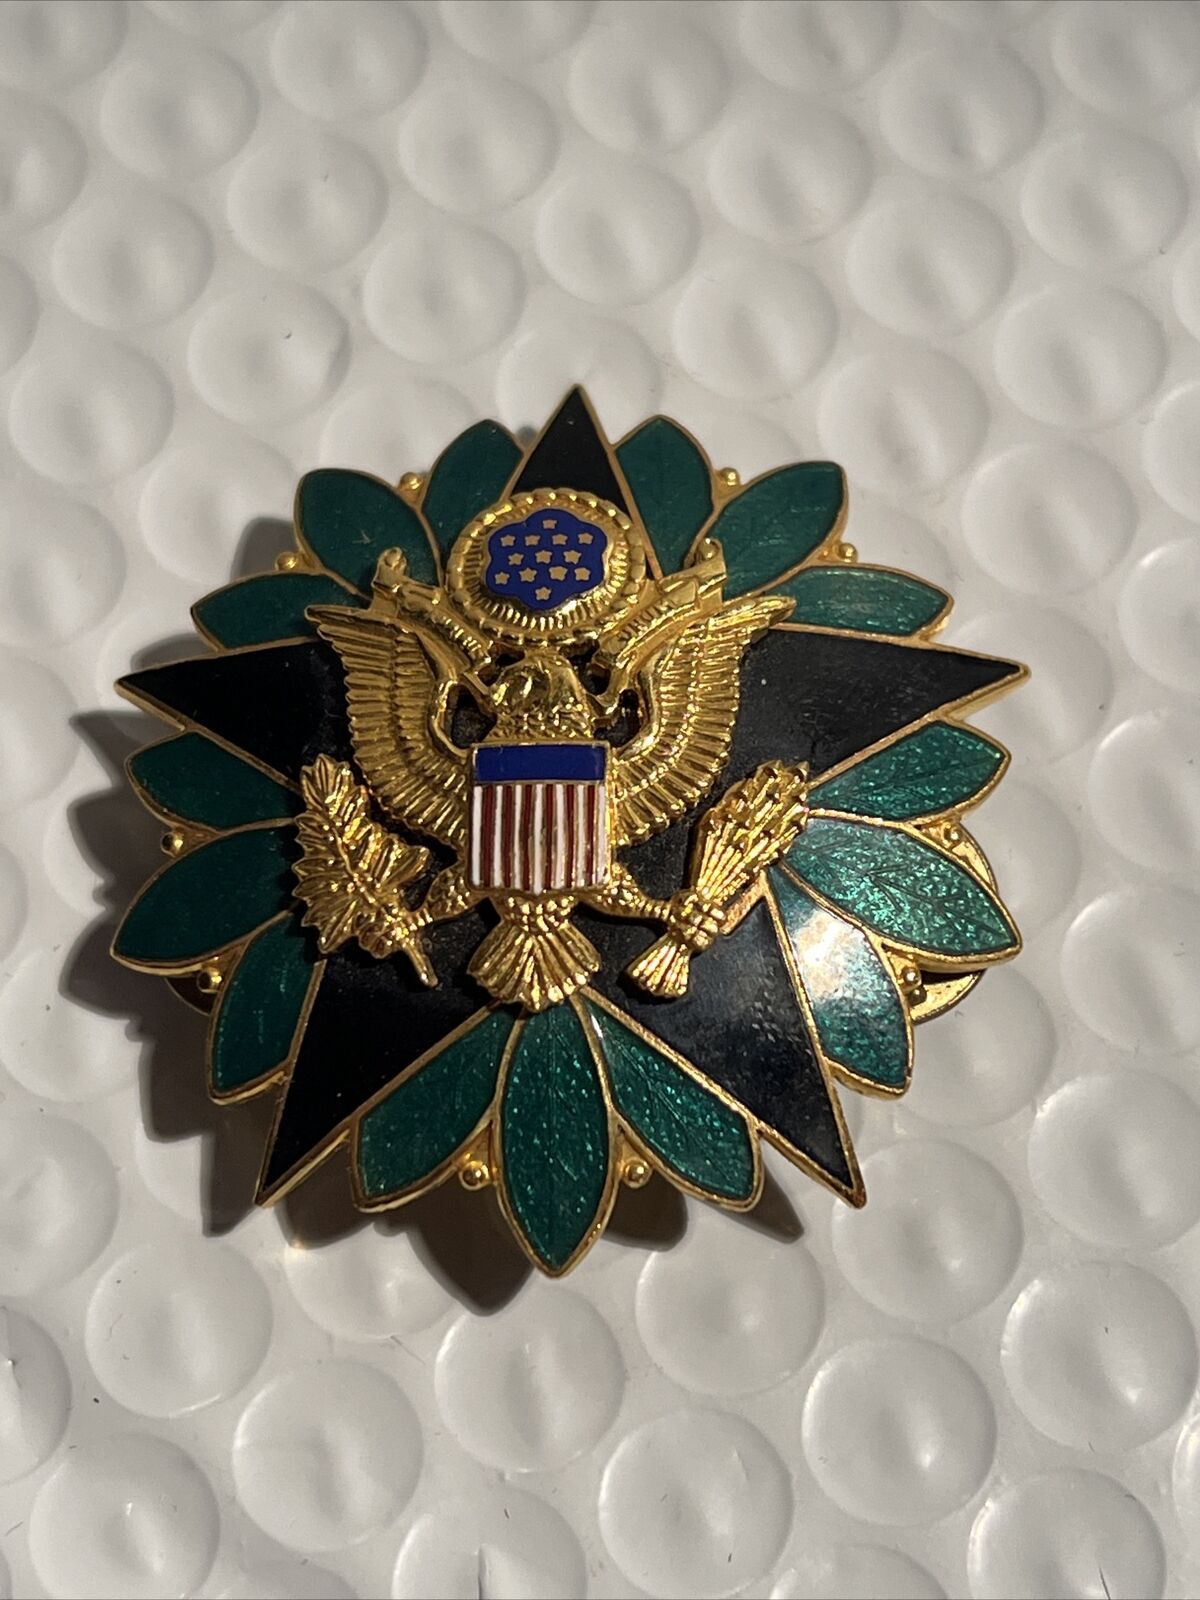 US Army Dod General Staff Officer Rank Insignia Medal Badge Pin Insignia- Meyer